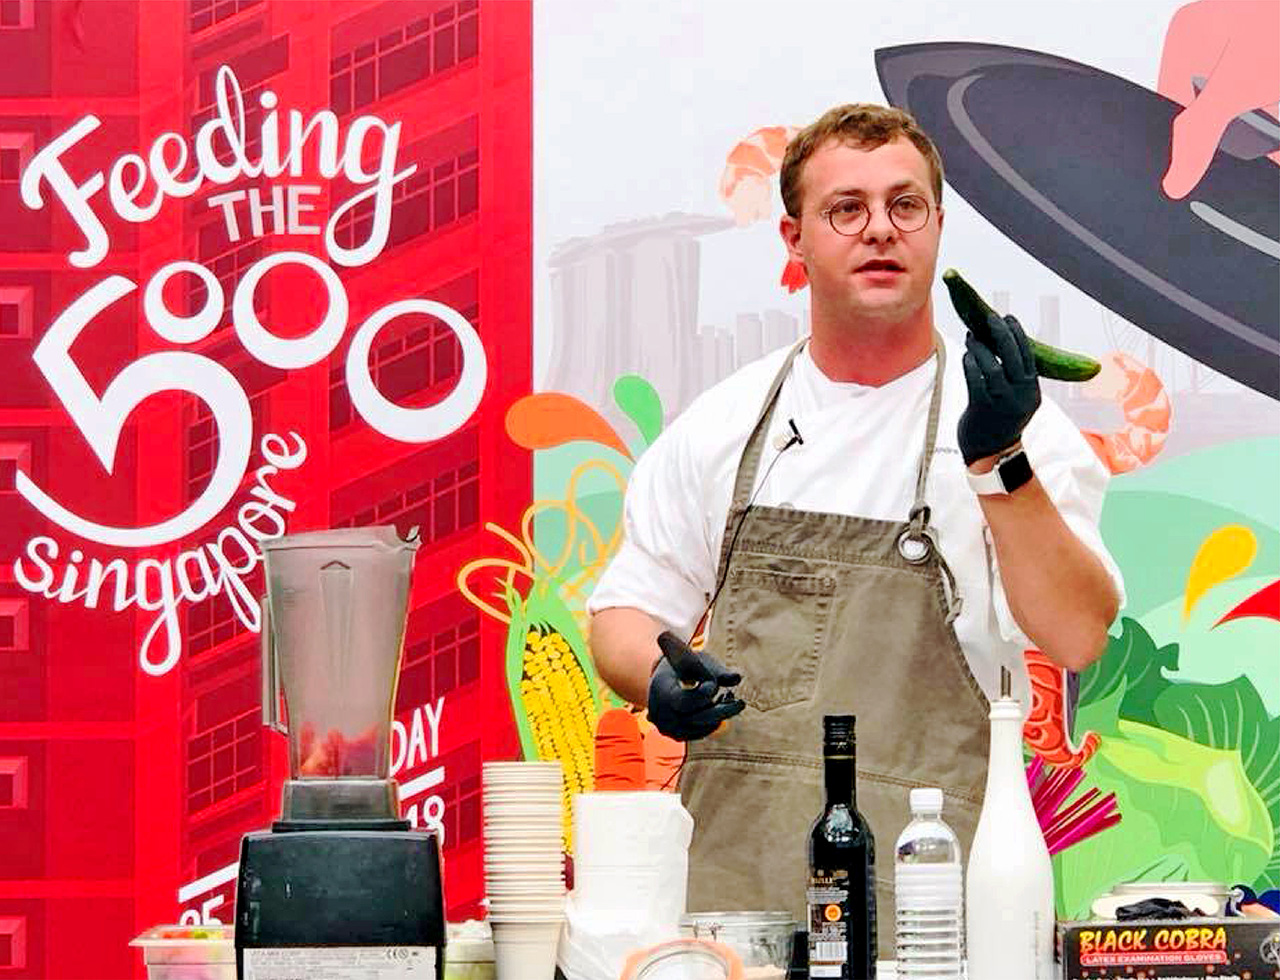 Chef during a cooking demonstration at Feeding the 5000 Singapore event